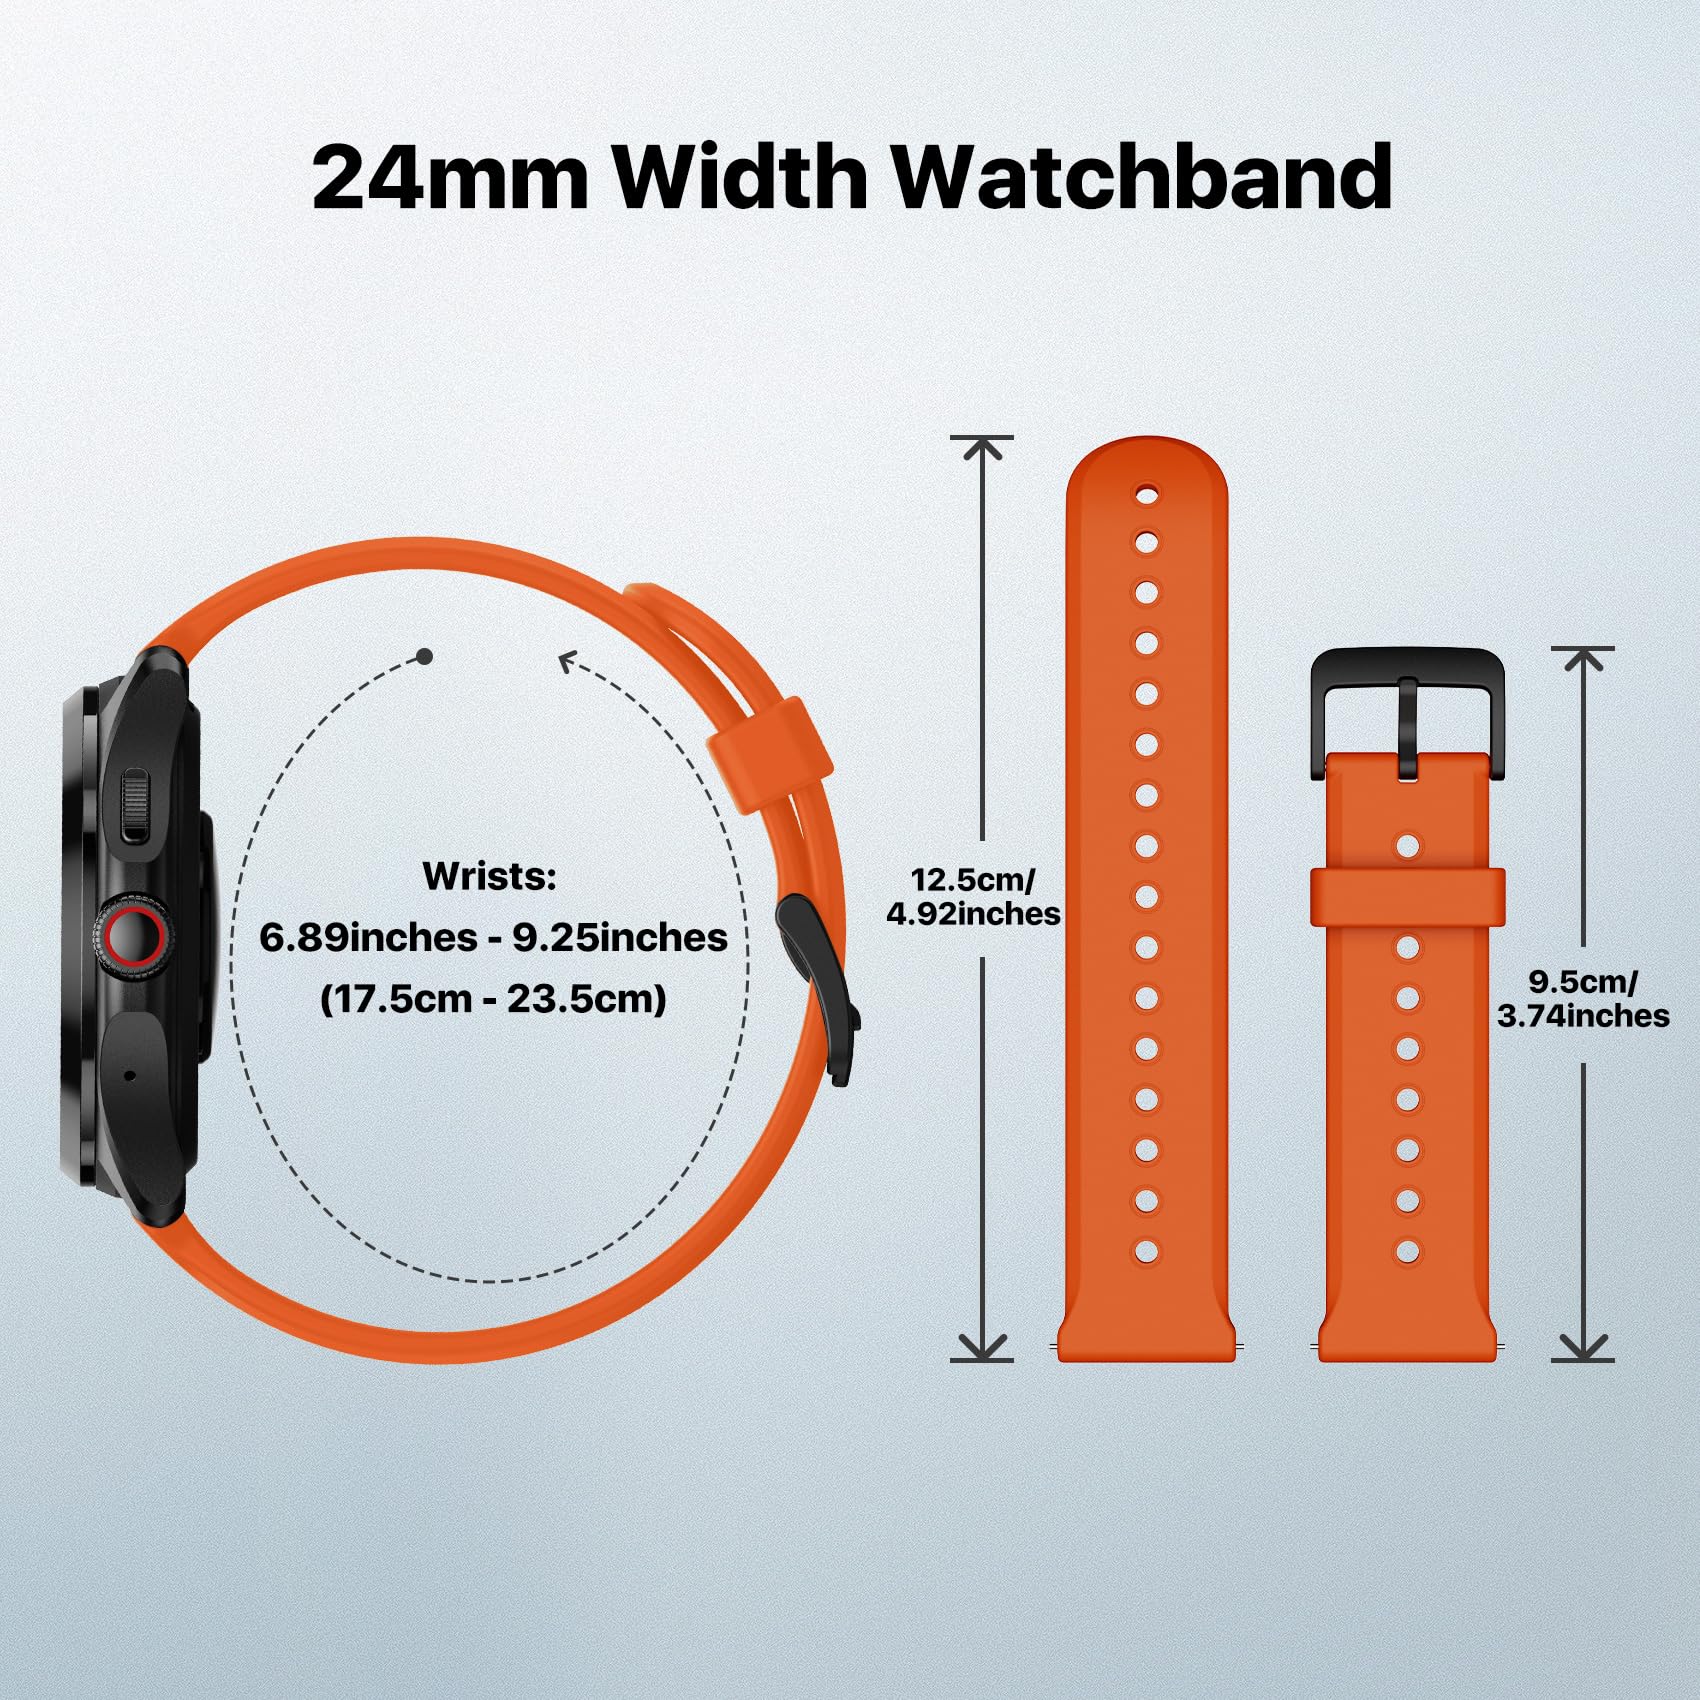 Ticwatch Pro 5 Android Smartwatch for Men Snapdragon W5+ Gen 1 Platform Plus 24mm Width Bonfire Orange Silicone Watch Strap Quick Release Watch Band, Wear OS Smart Watch 80 Hrs Long Battery Life